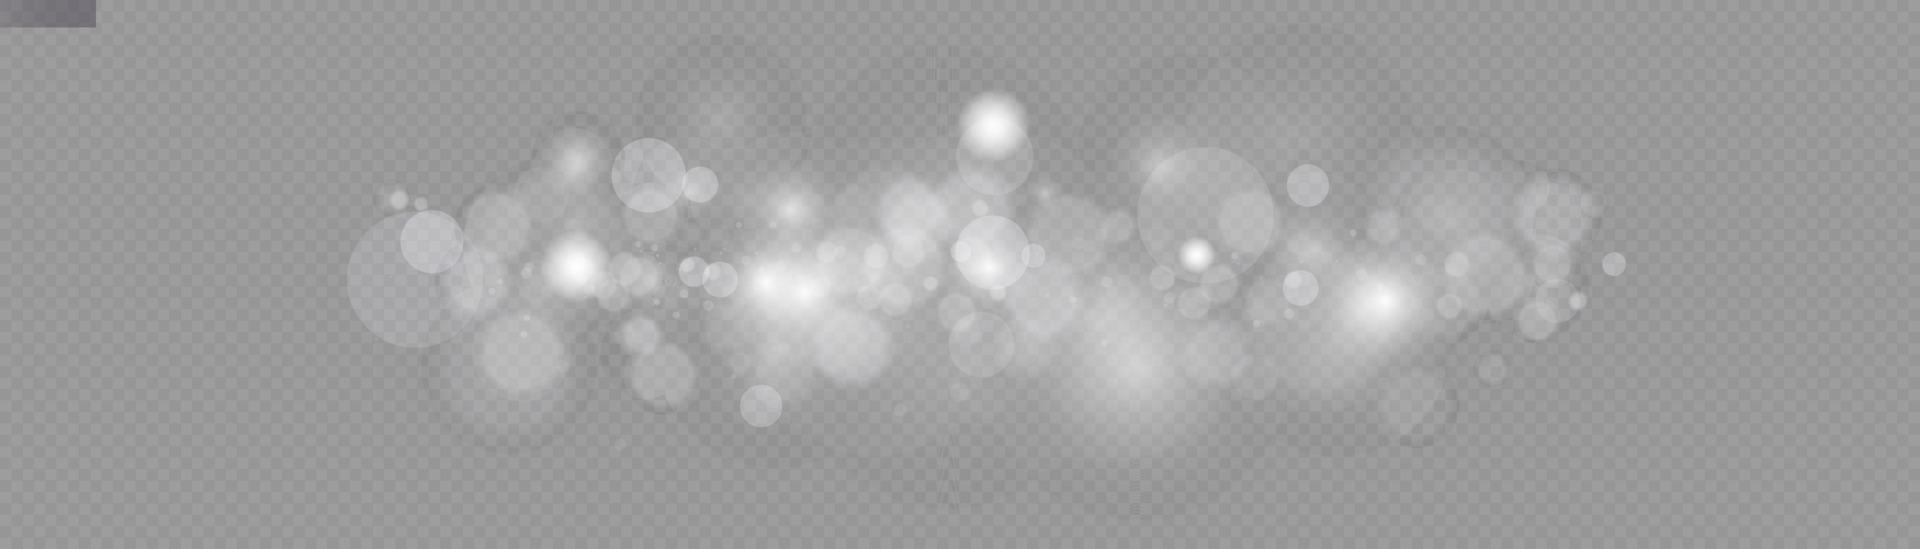 Light abstract glowing bokeh lights. Light bokeh effect isolated. Christmas background from shining dust. Christmas concept flare sparkle. White png dust light. vector